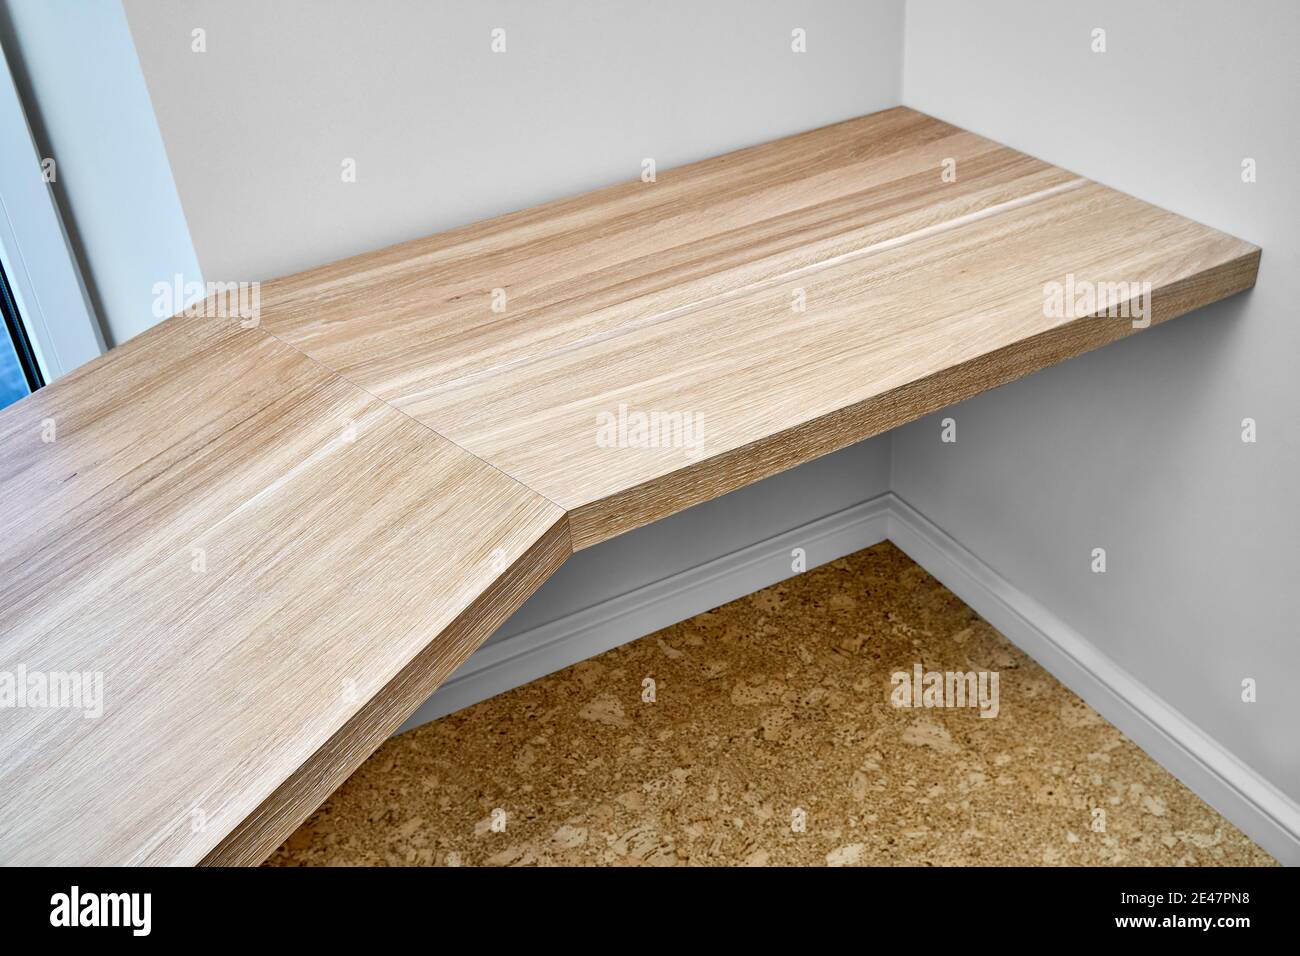 Elegant writing desk made with bleached solid oak timber mounted on white wall, upper view Stock Photo